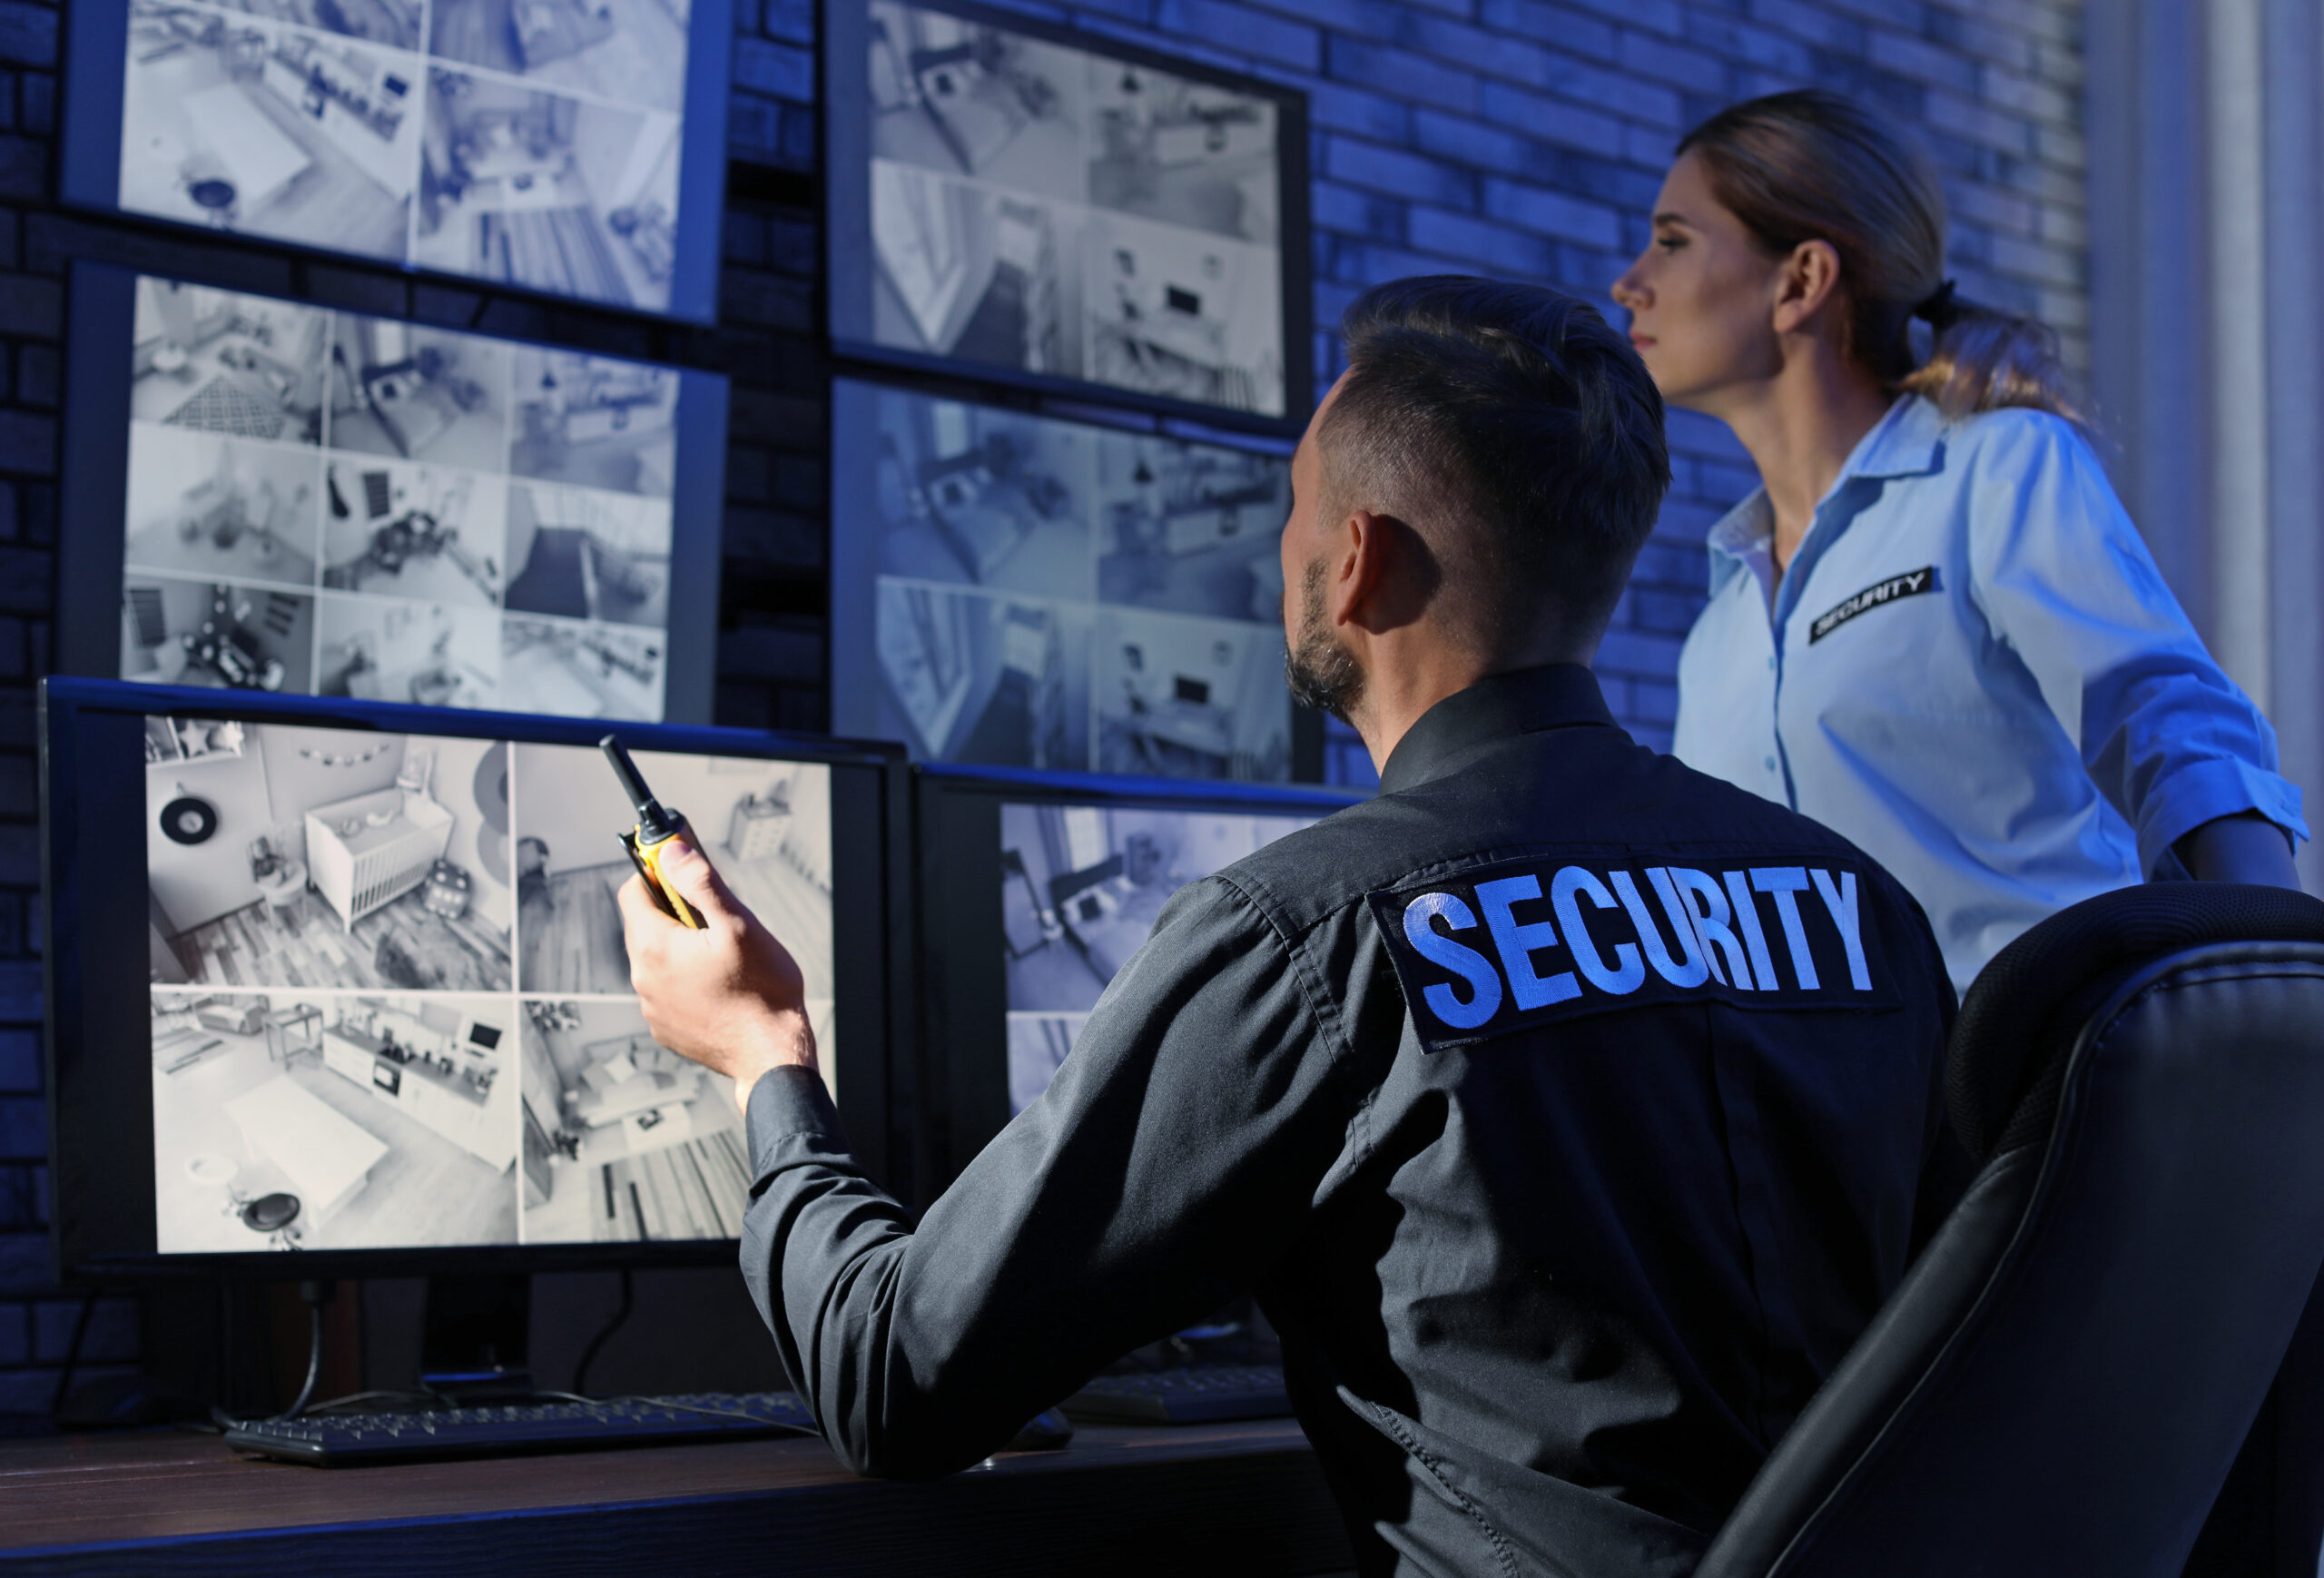 Stock image of two security guards looking at security screens - AW Precision